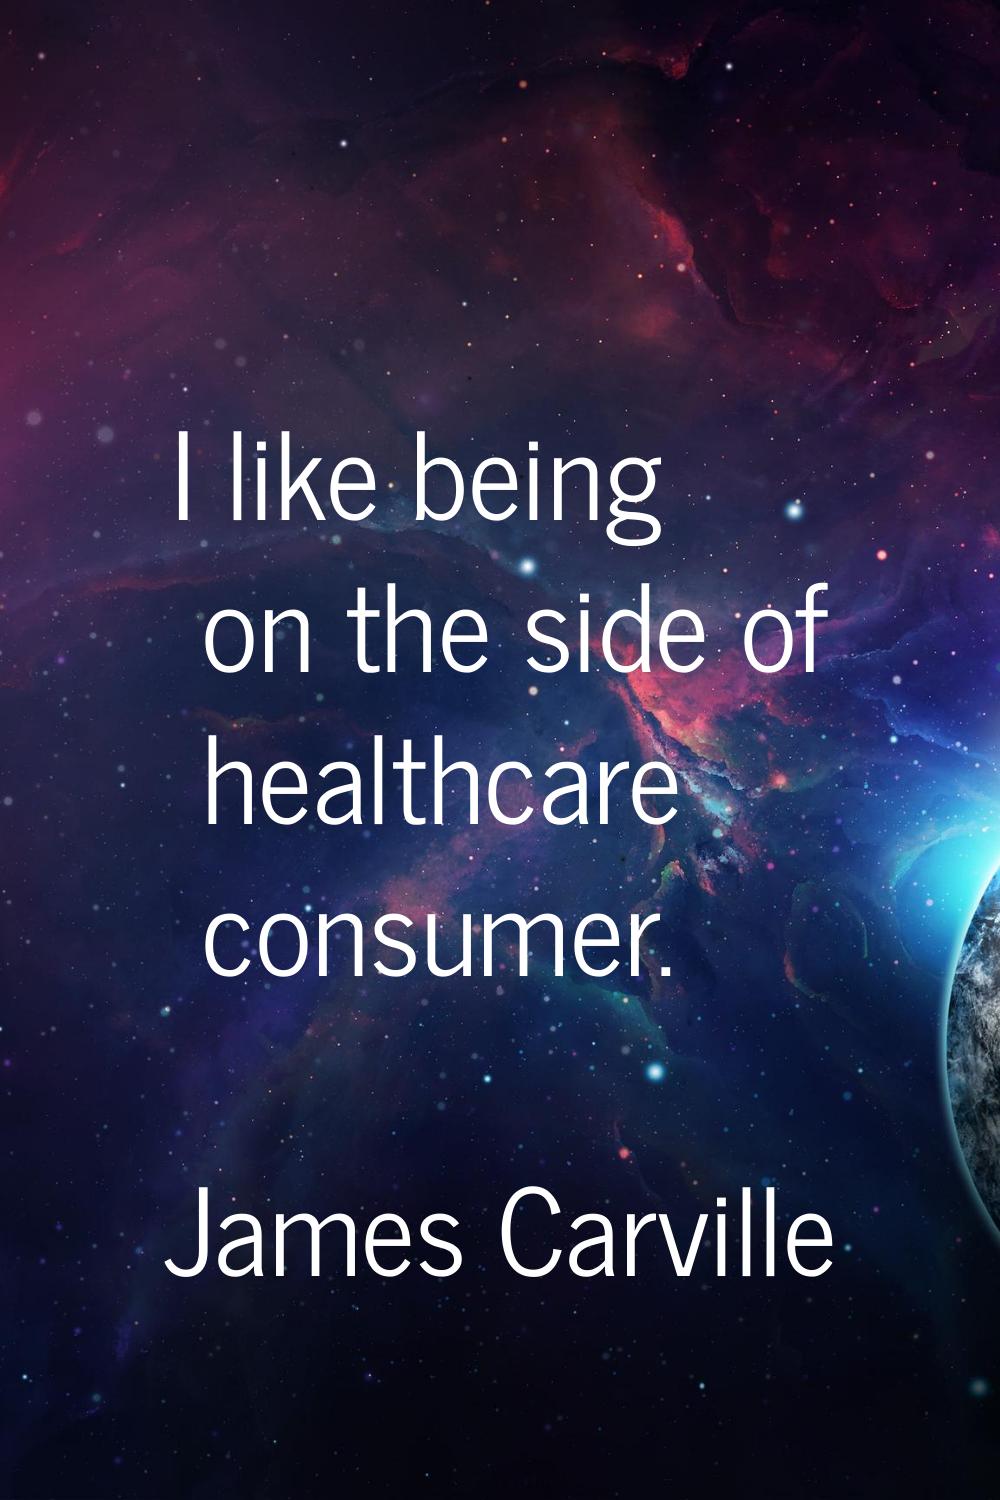 I like being on the side of healthcare consumer.